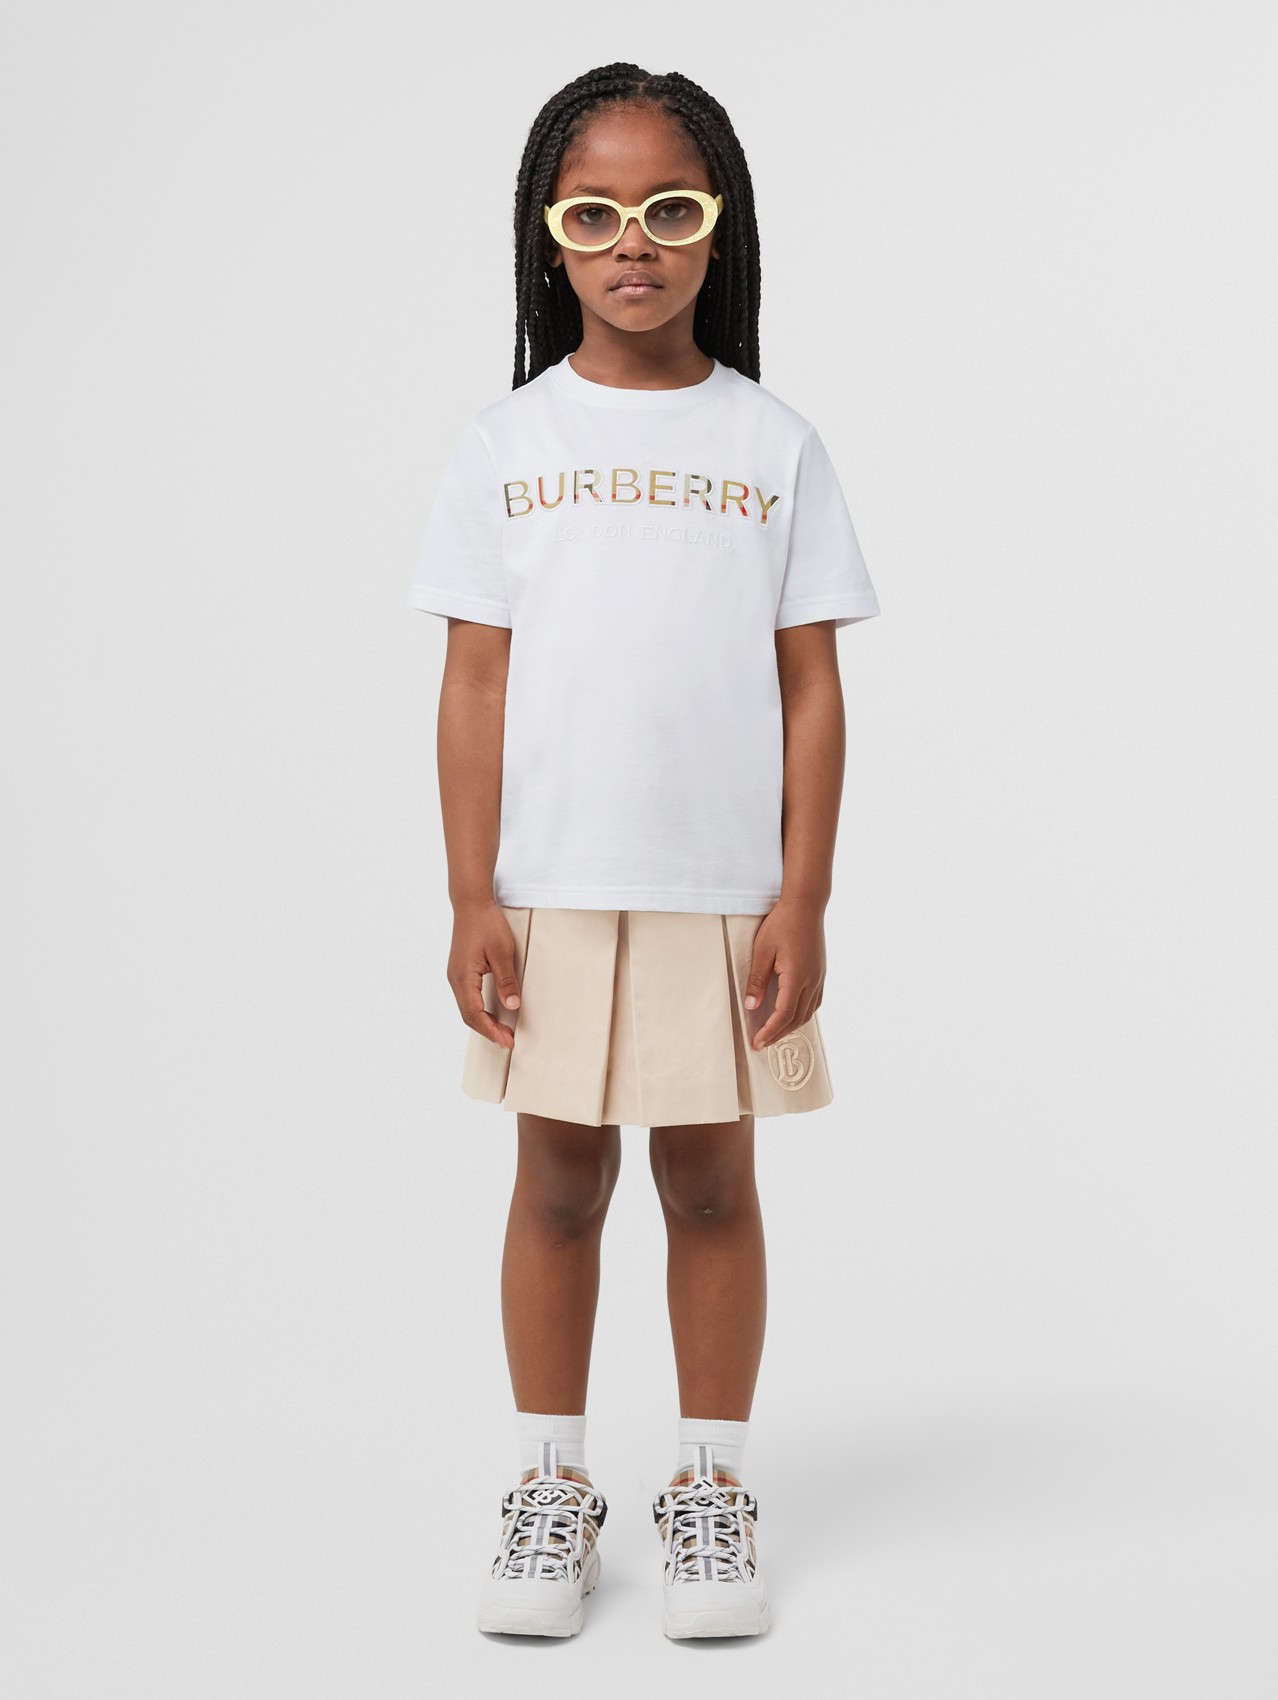 T-shirts Burberry Kids T-shirts Burberry Kids T-shirt BURBERRY 6 months white Tops Top Kids Baby Burberry Clothing Burberry Kids Tops Burberry Kids Tops 